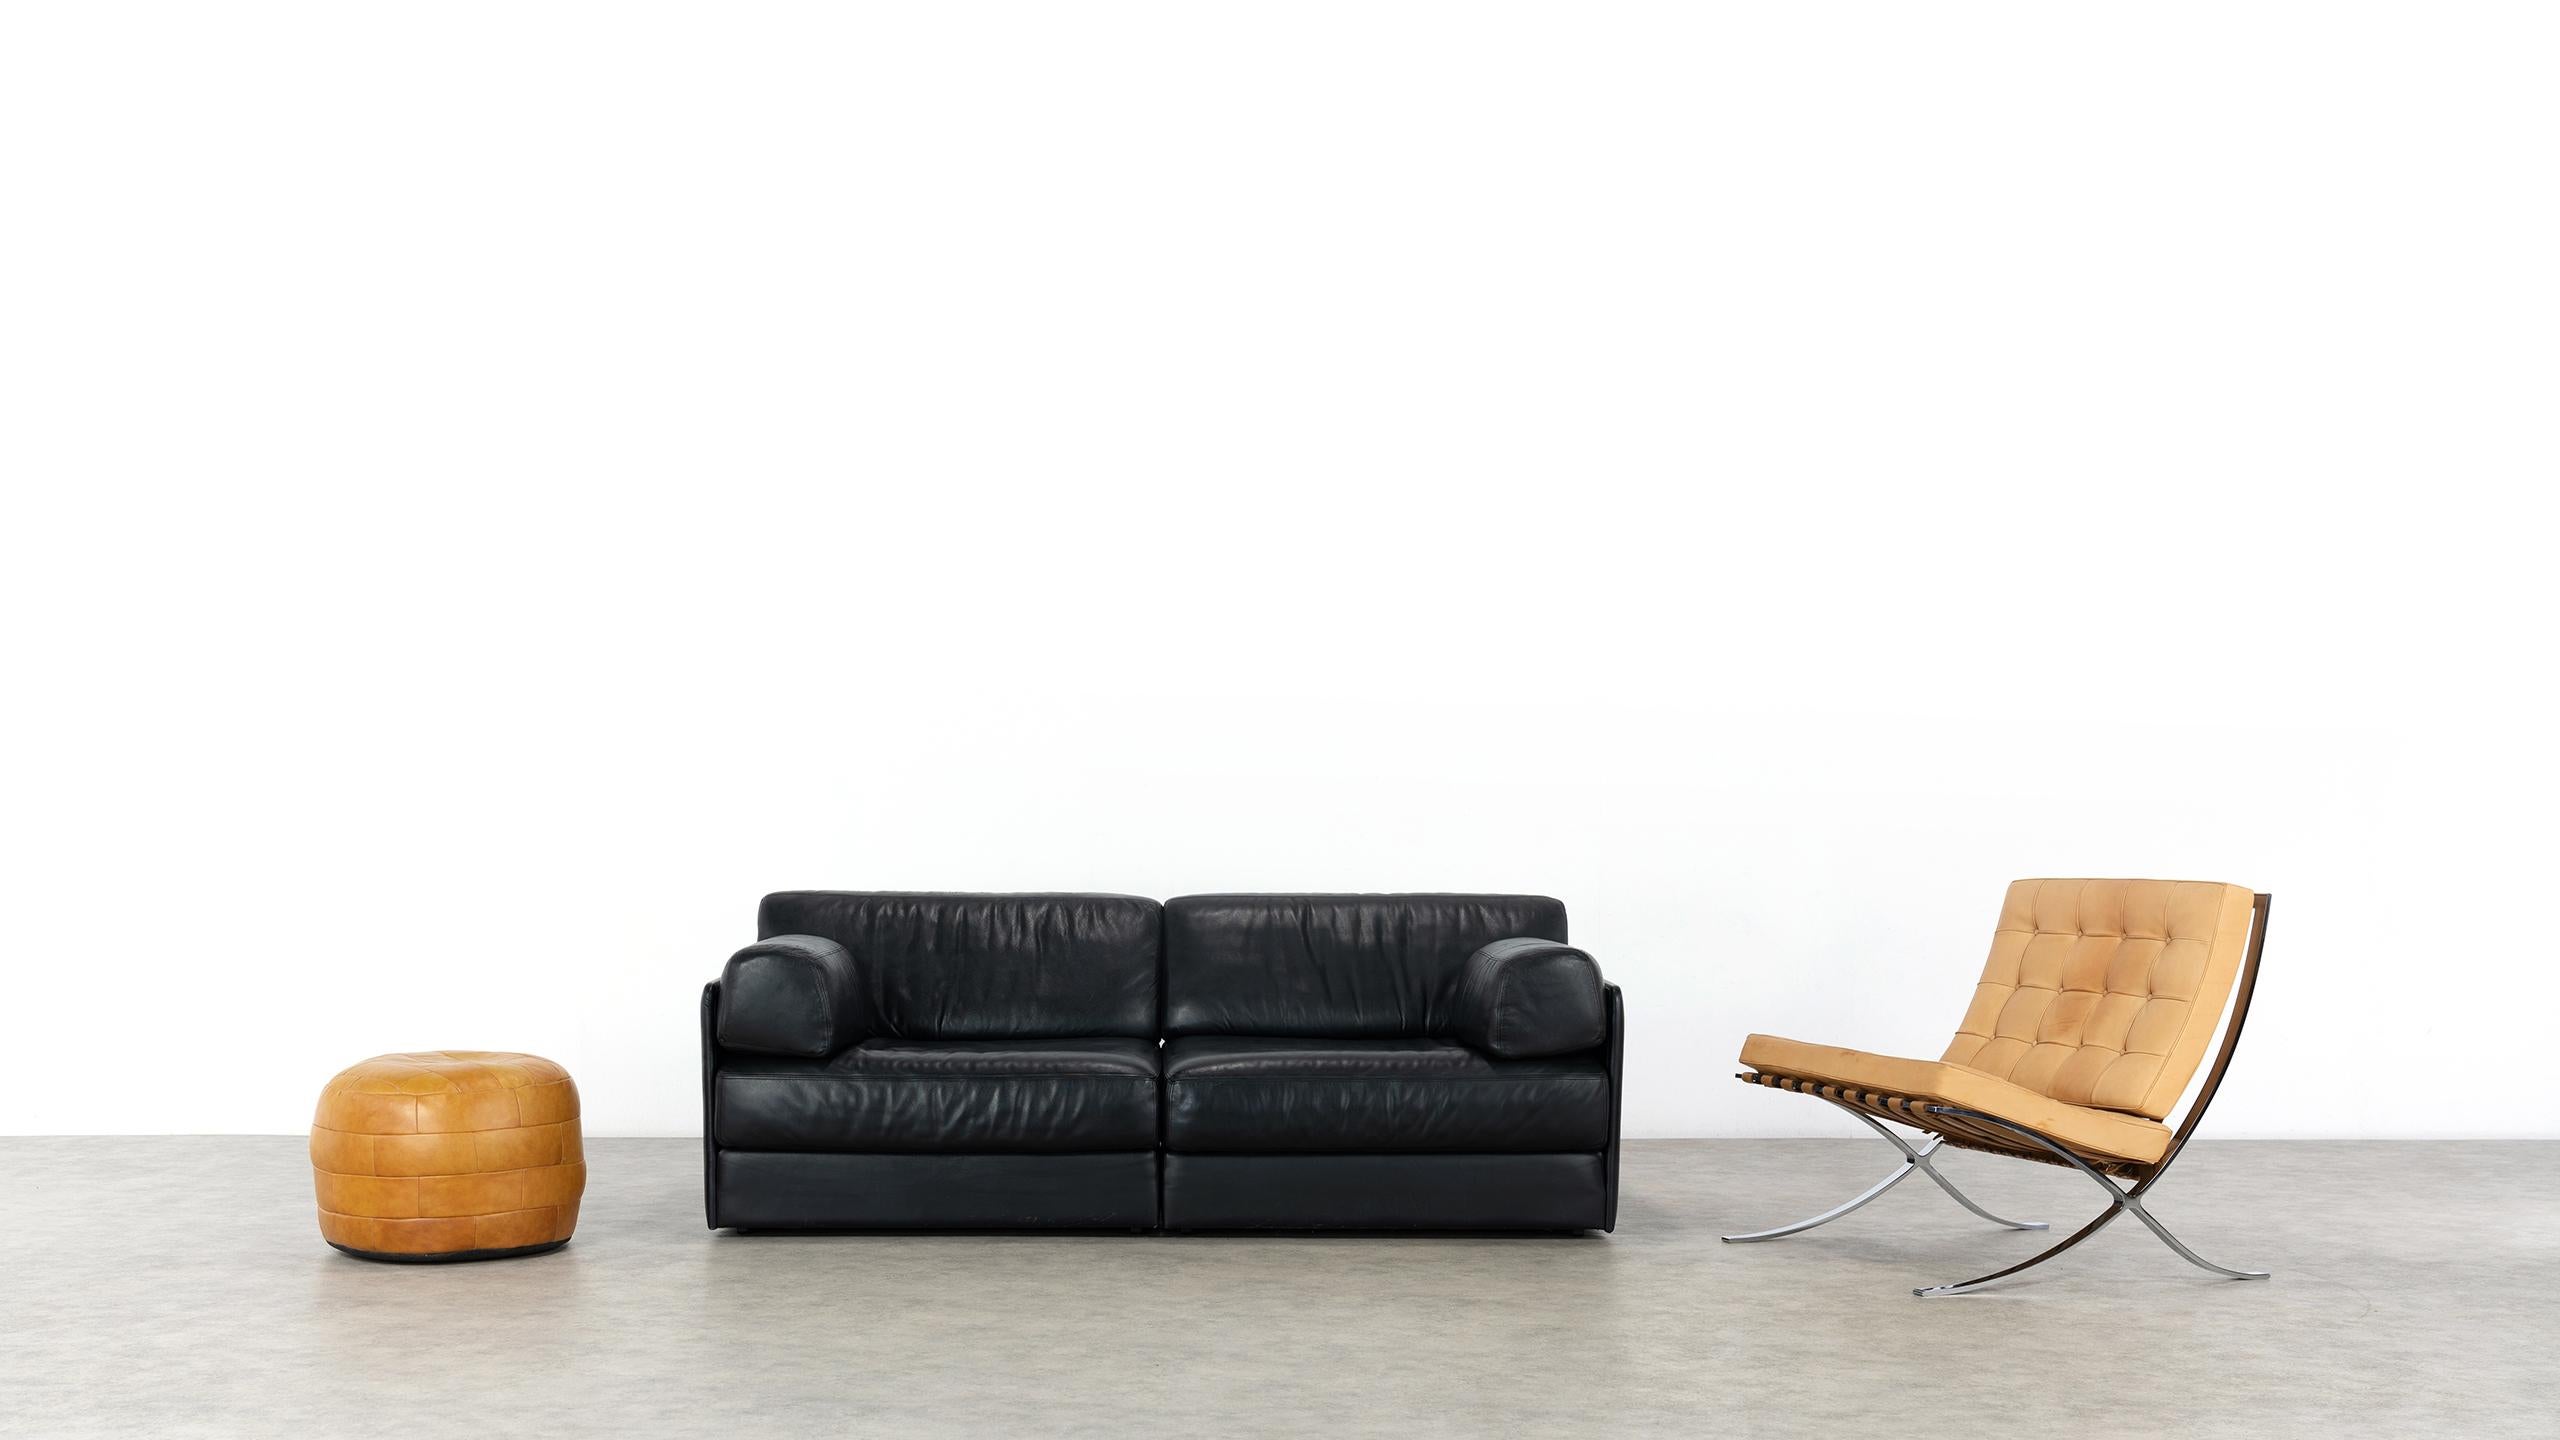 De Sede DS76, sofa & daybed in black leather, 1972 by De Sede Design Team Swiss

The DS-76 Sofa was launched as early as 1972, when it was considered revolutionary, no sofa bed could manage with a simpler mechanism: in a few simple steps, the